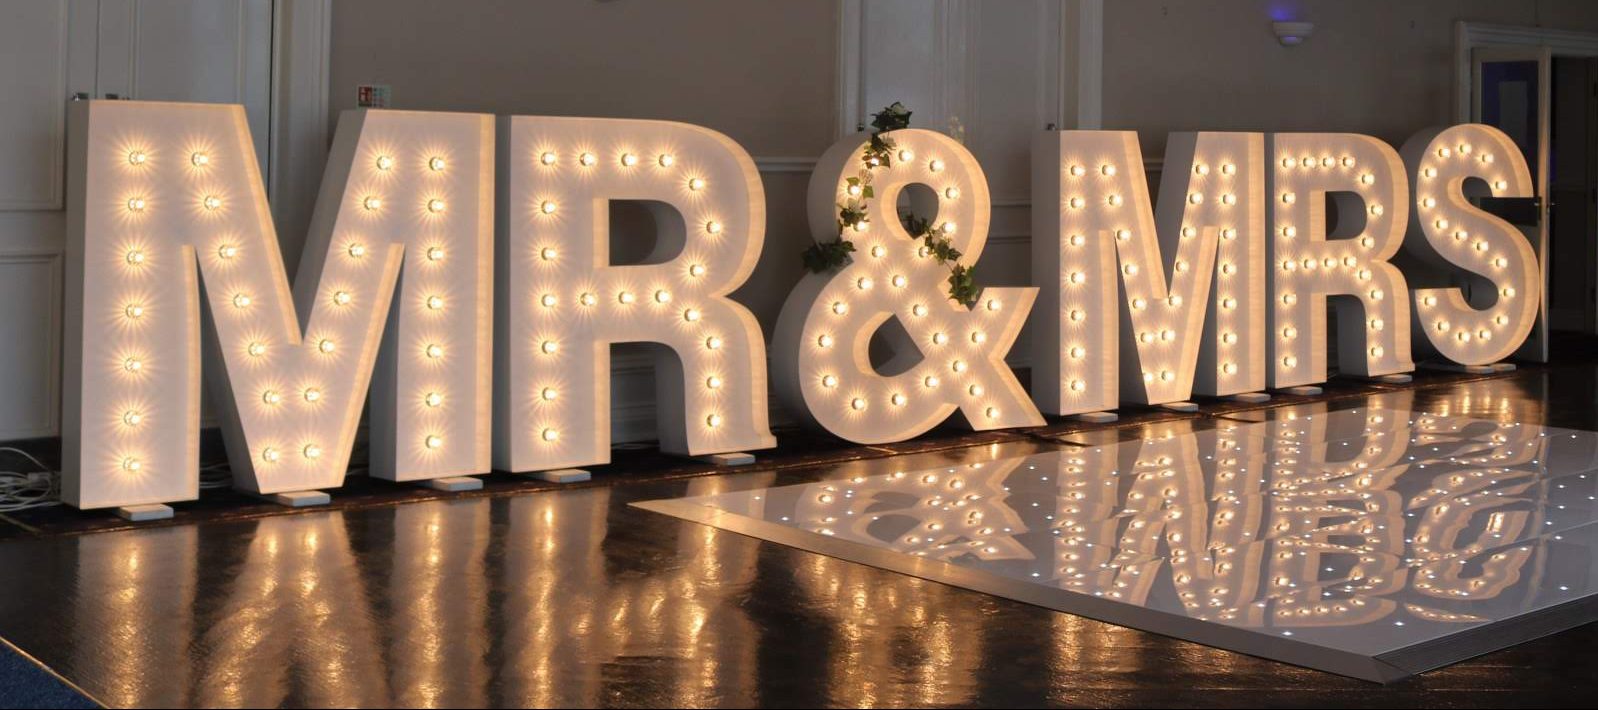 3D Light up MR & MRS Letters for hire with star light dance floor